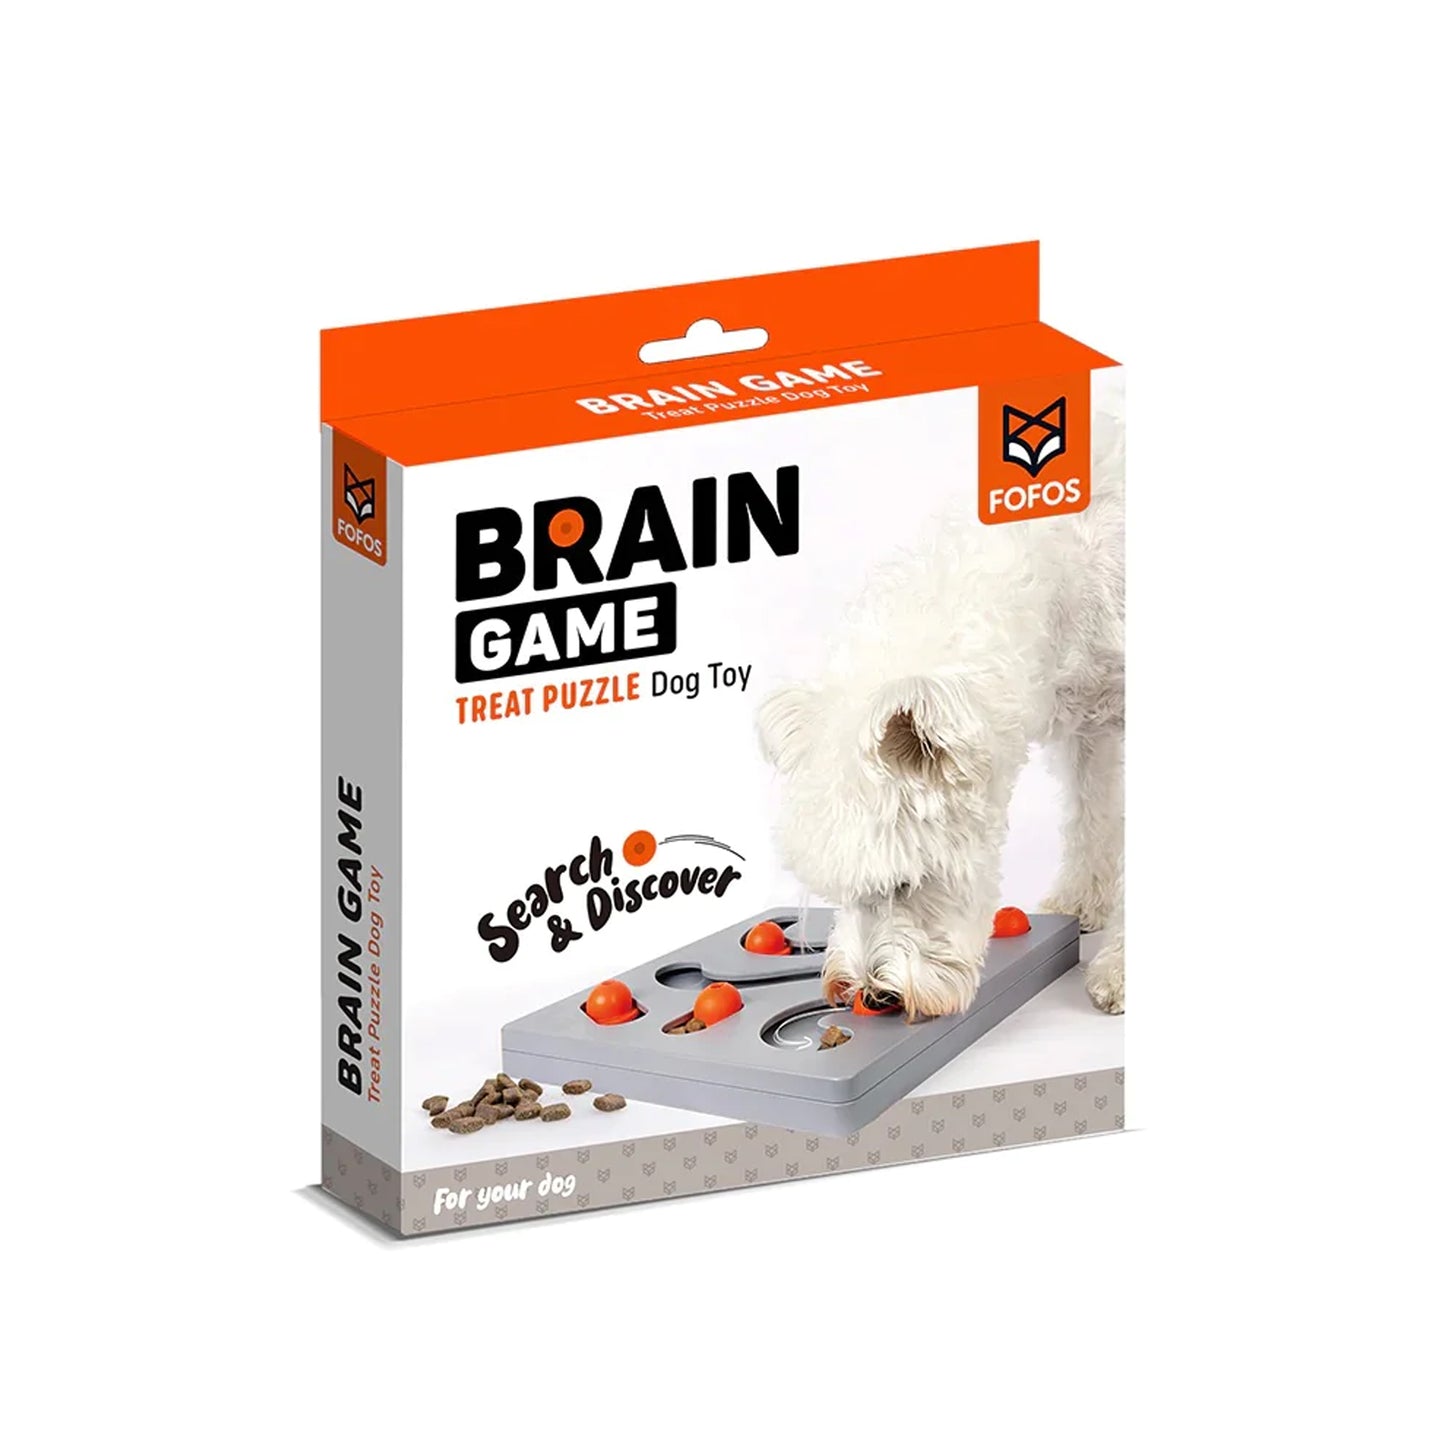 Fofos Brain Game Treat Puzzle Dog Toy